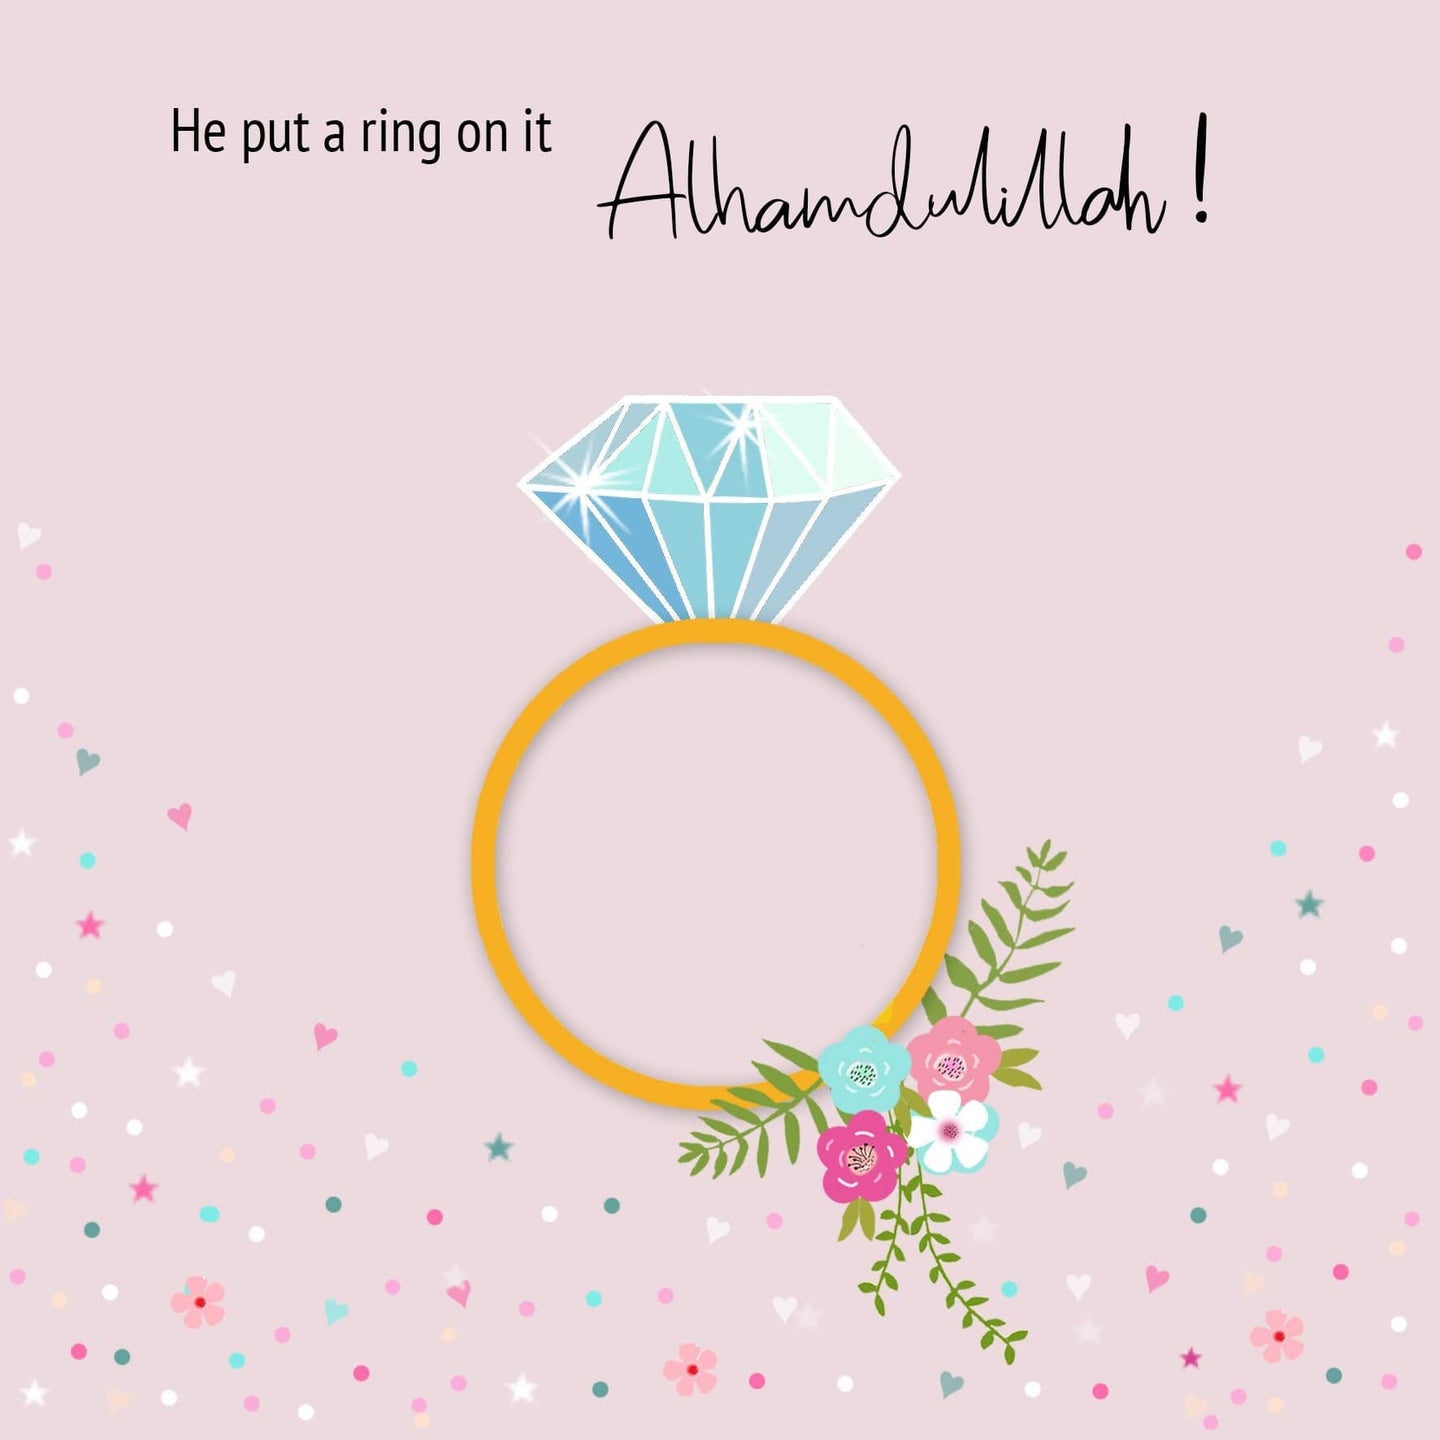 Engagement Card | He put a ring on it - Alhamdulillah !